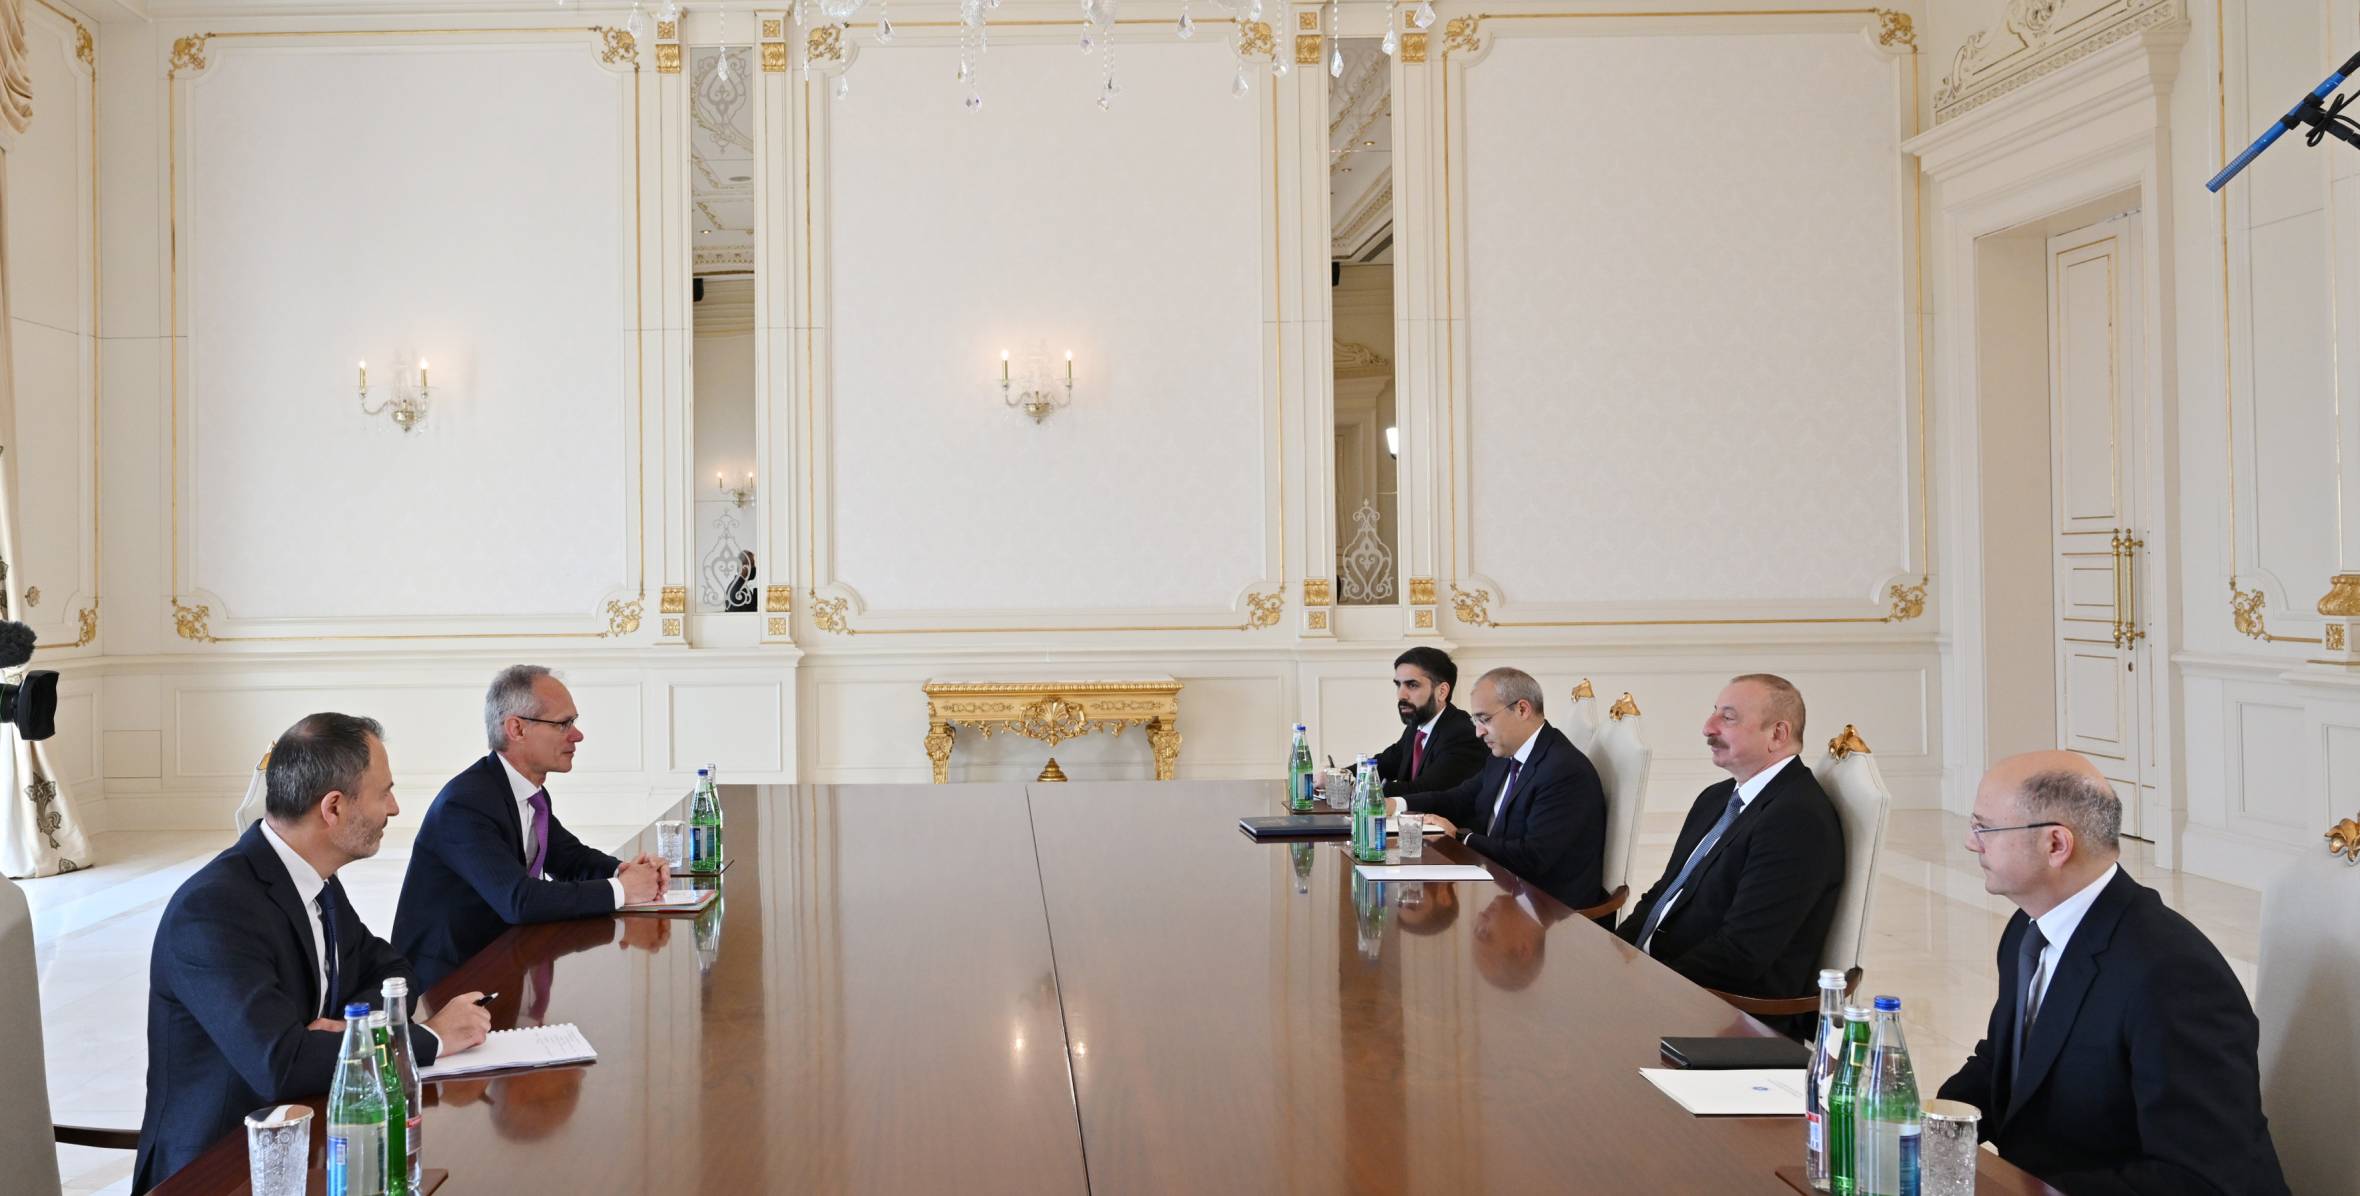 Ilham Aliyev received President of Exploration & Production of TotalEnergies